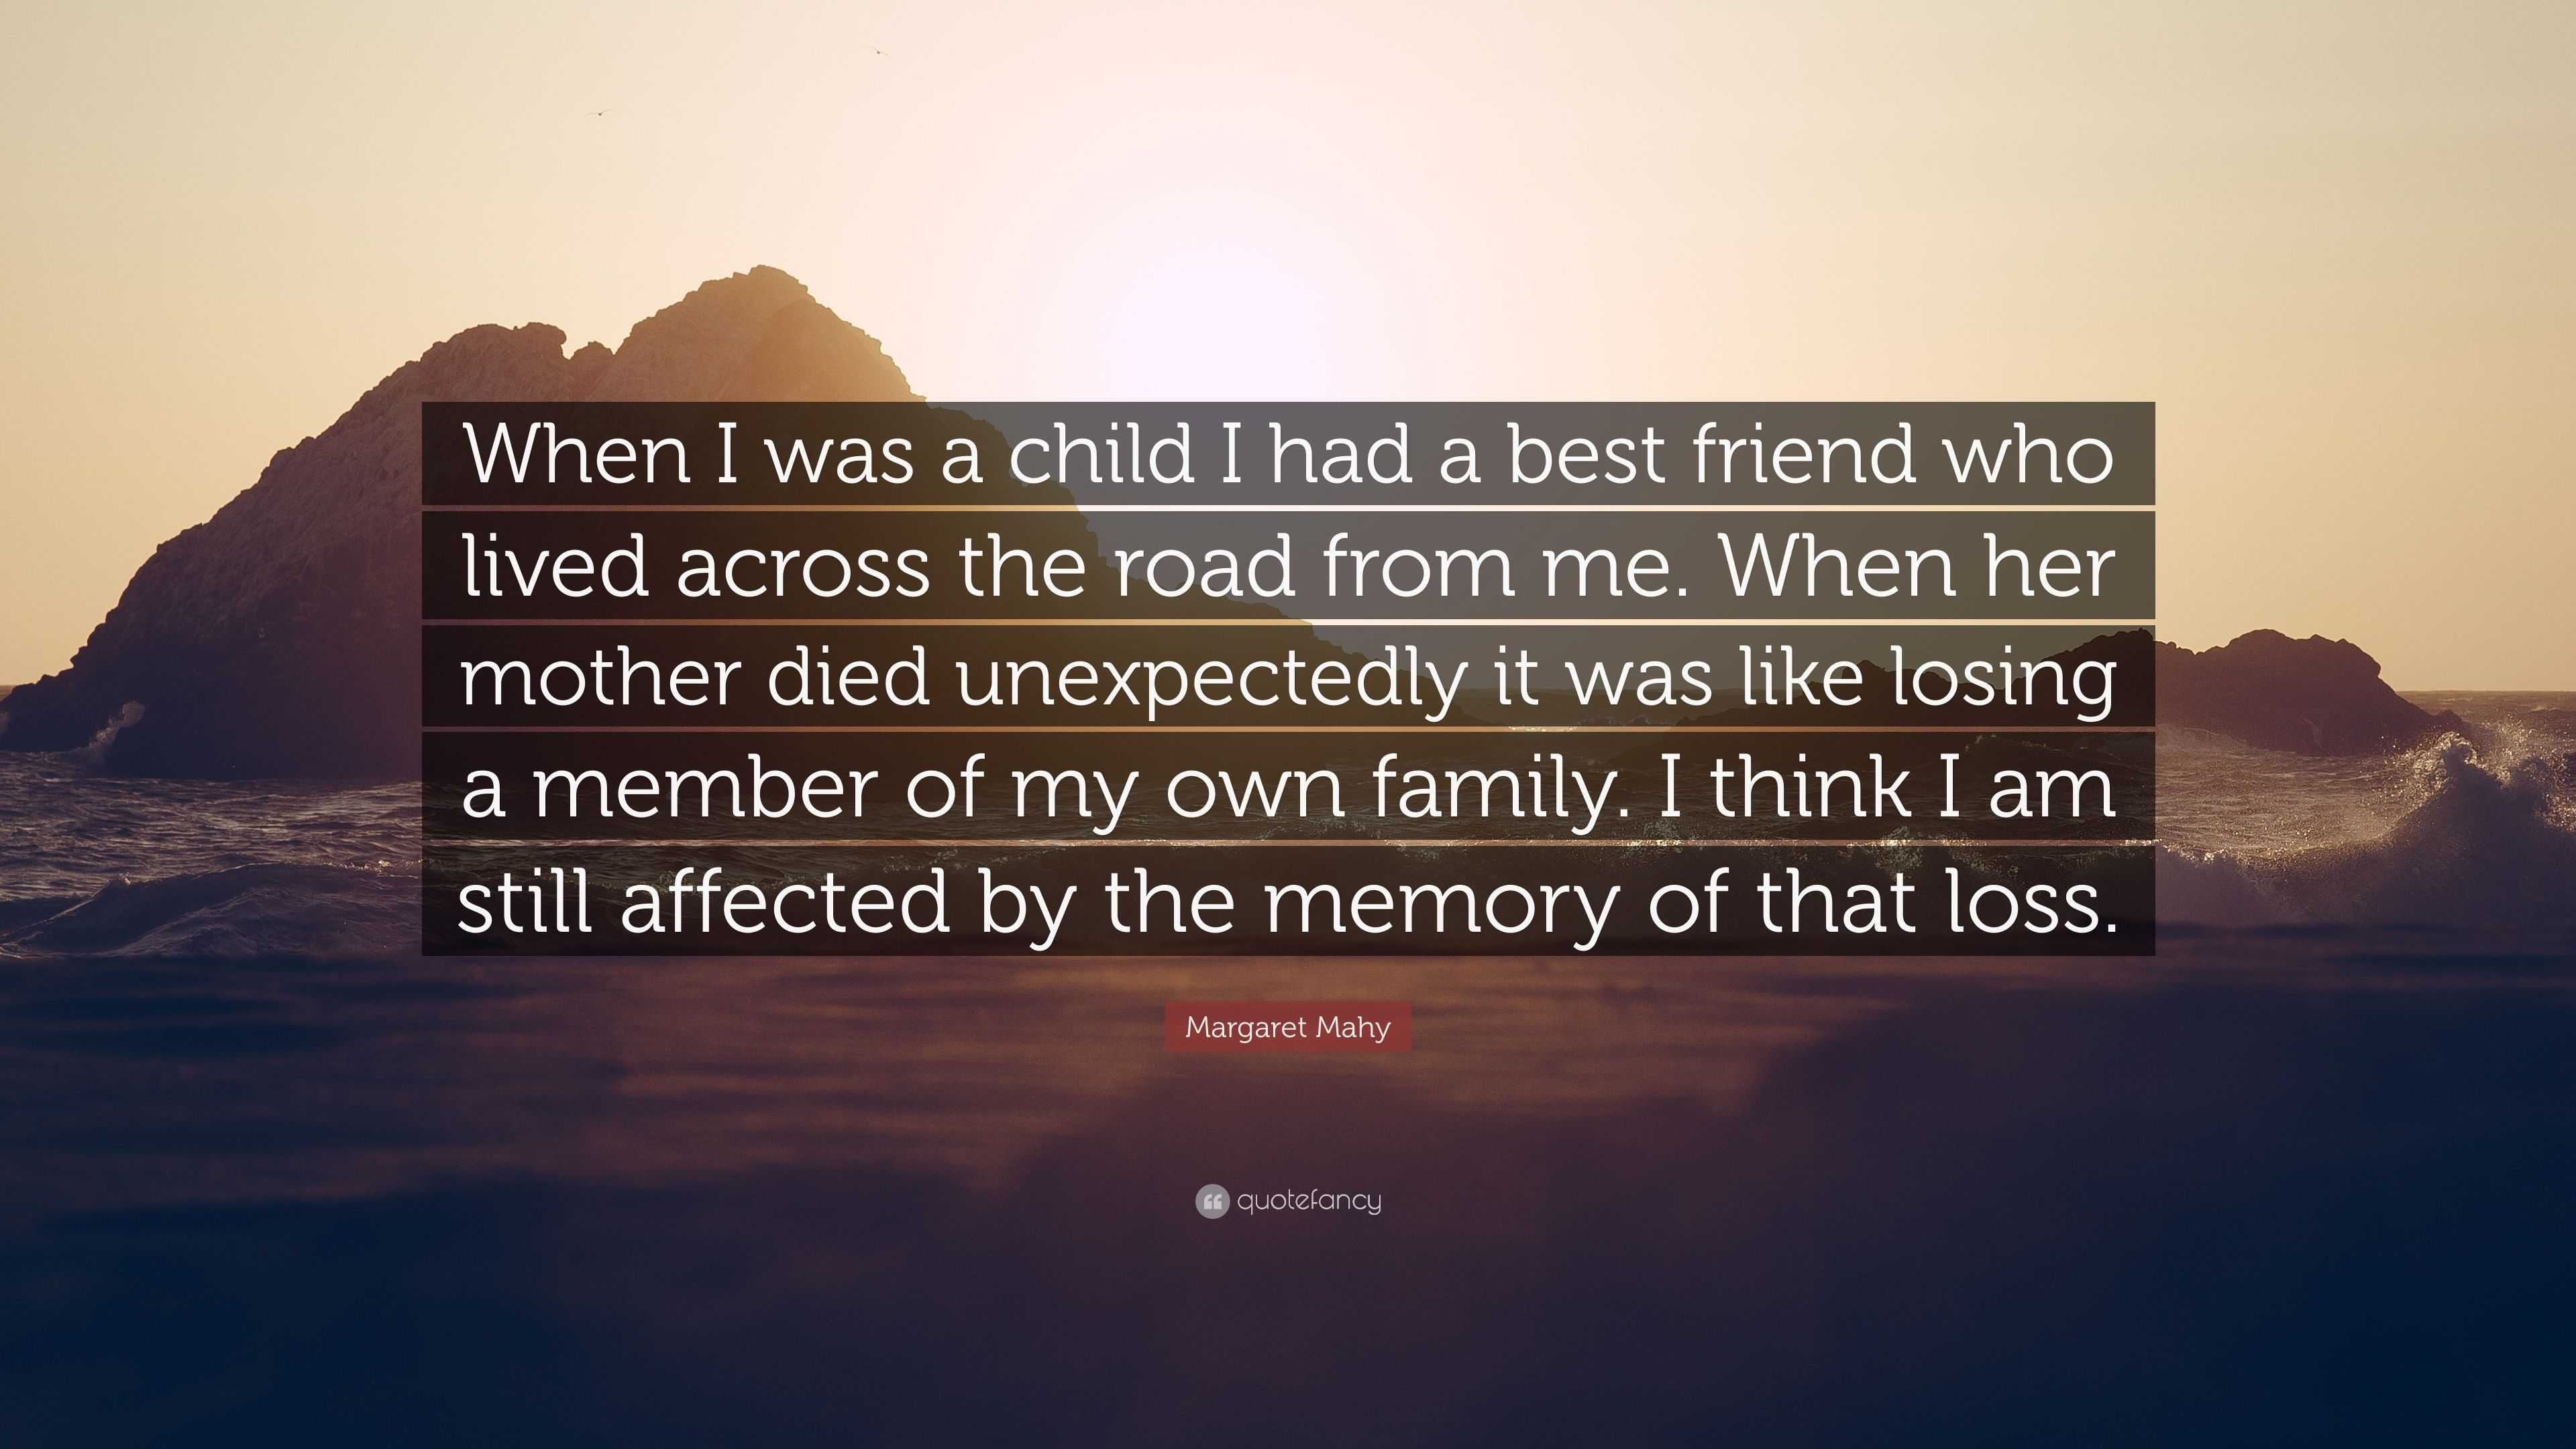 Margaret Mahy Quote: “When I was a child I had a best friend who lived ...